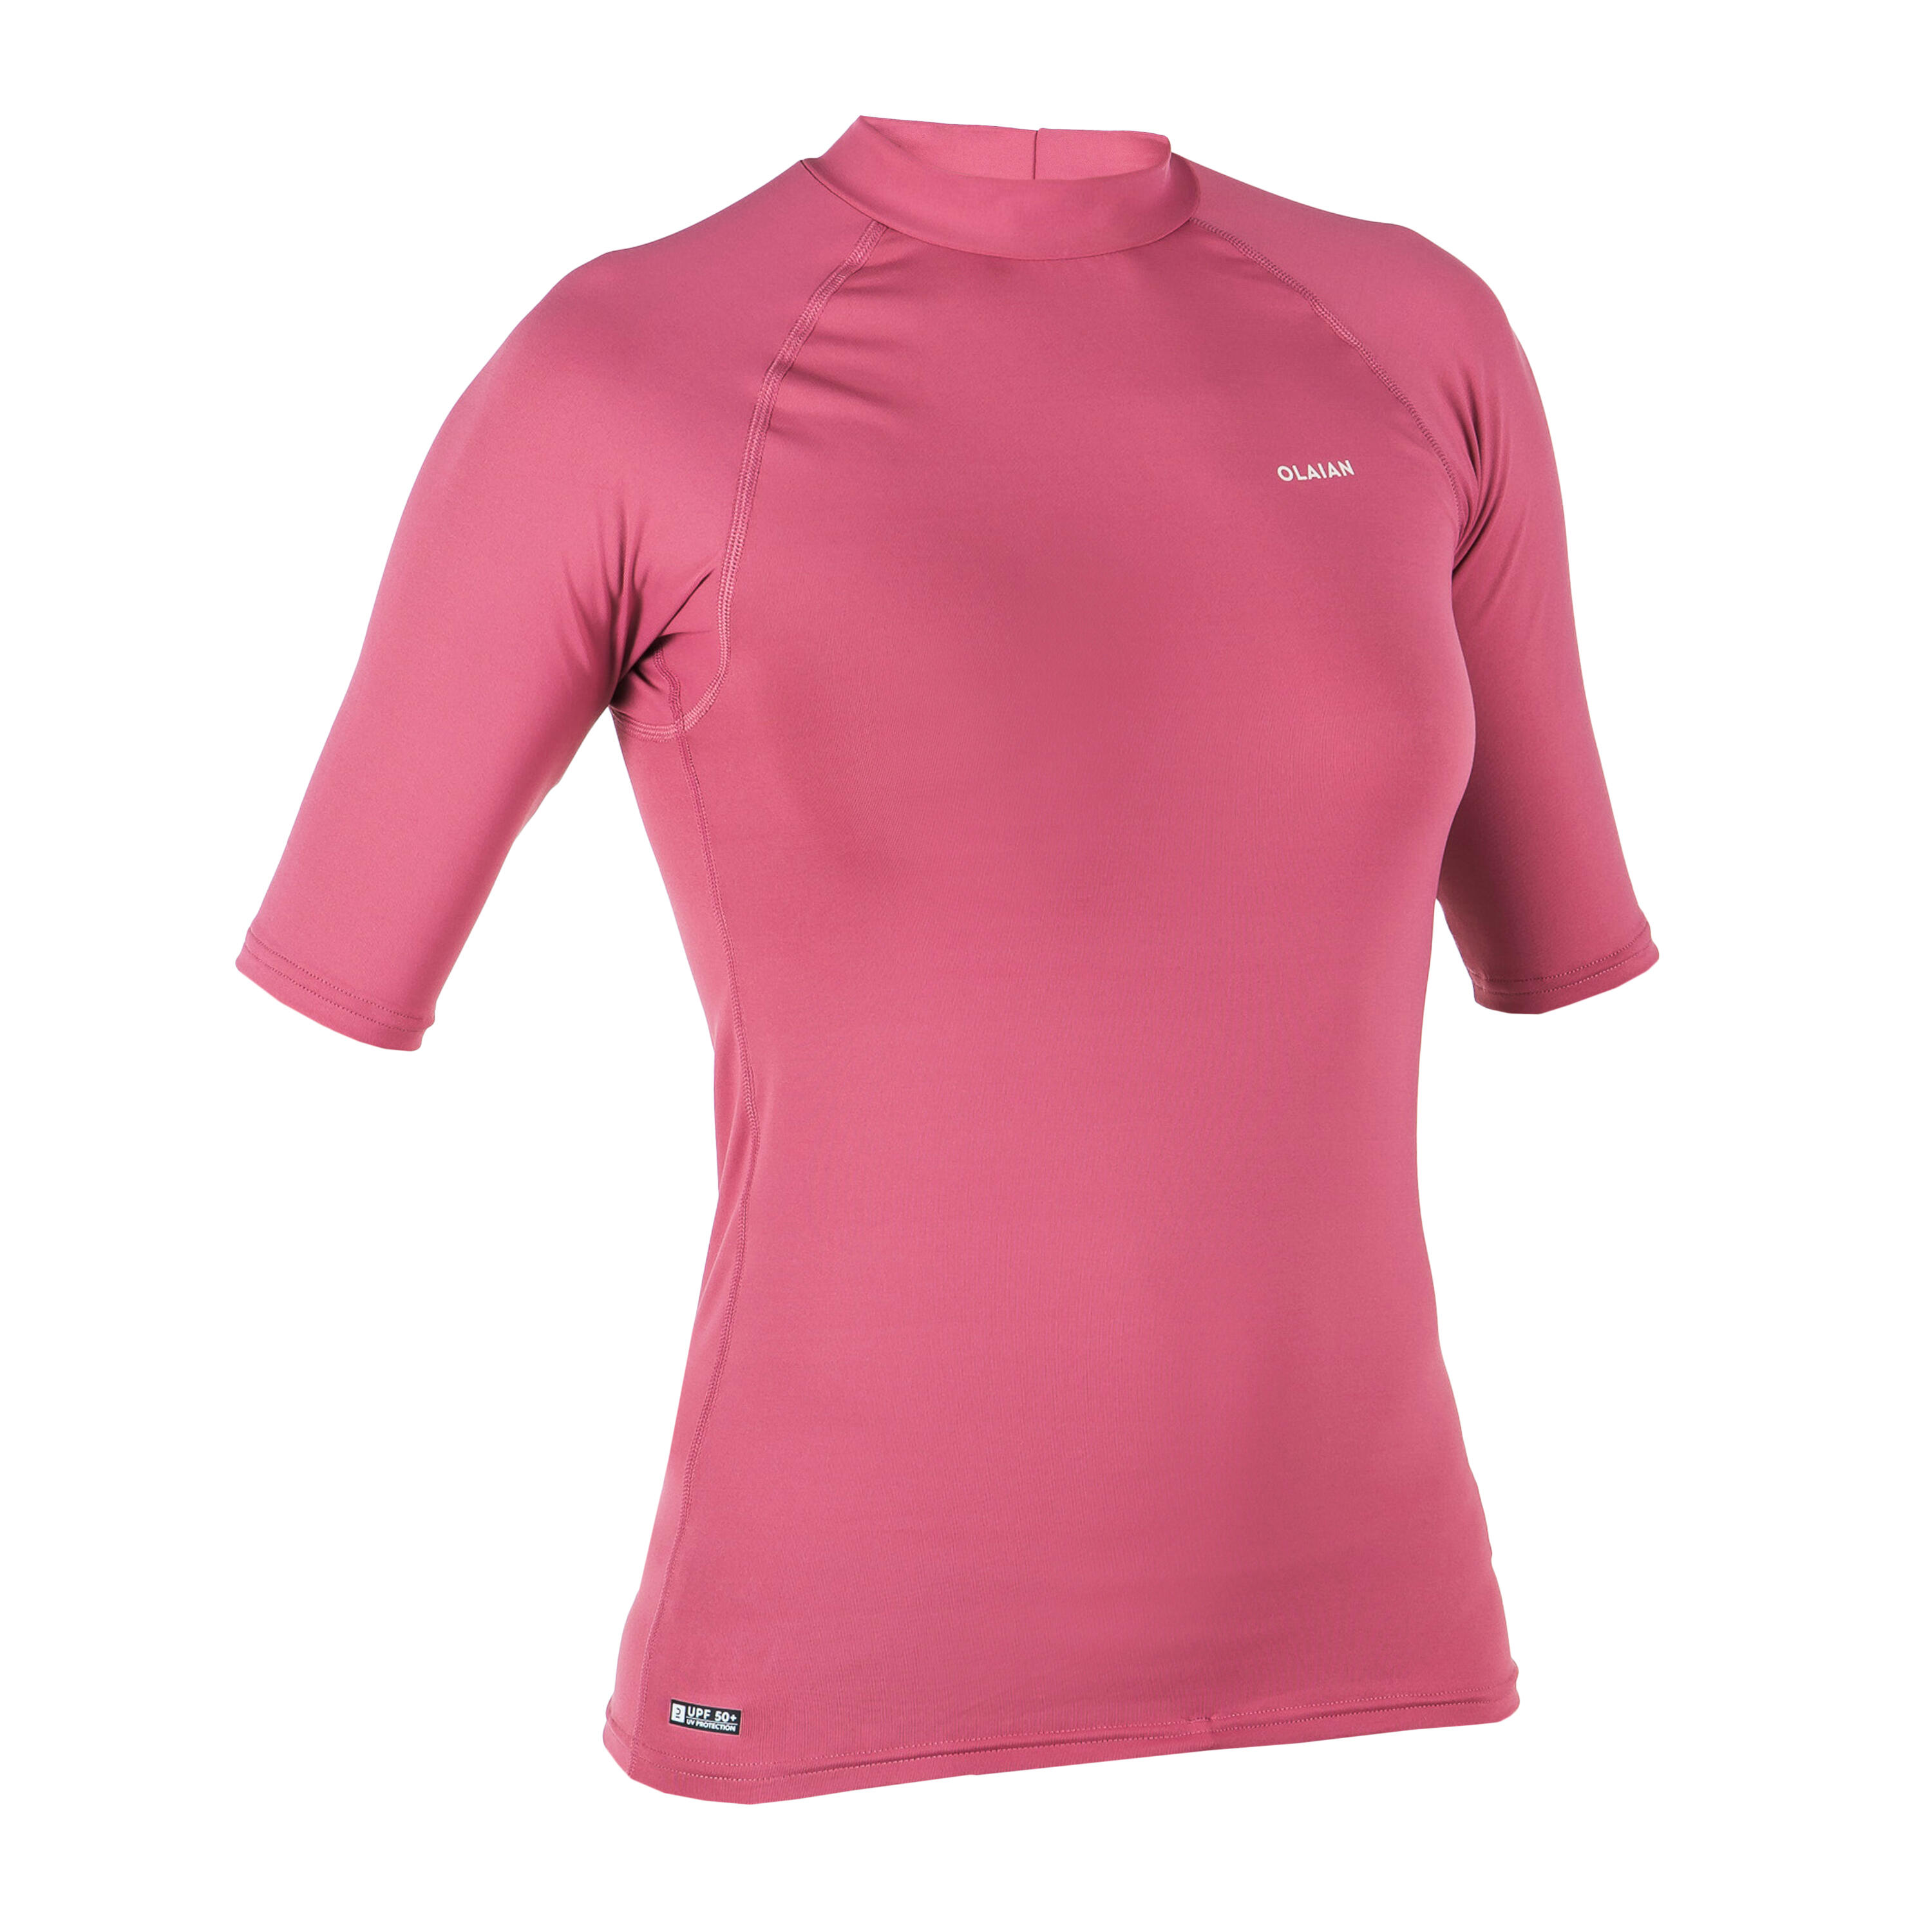 Women's UV-Protective Surfing Rash Guard - 100 Pink - Old pink - Olaian -  Decathlon